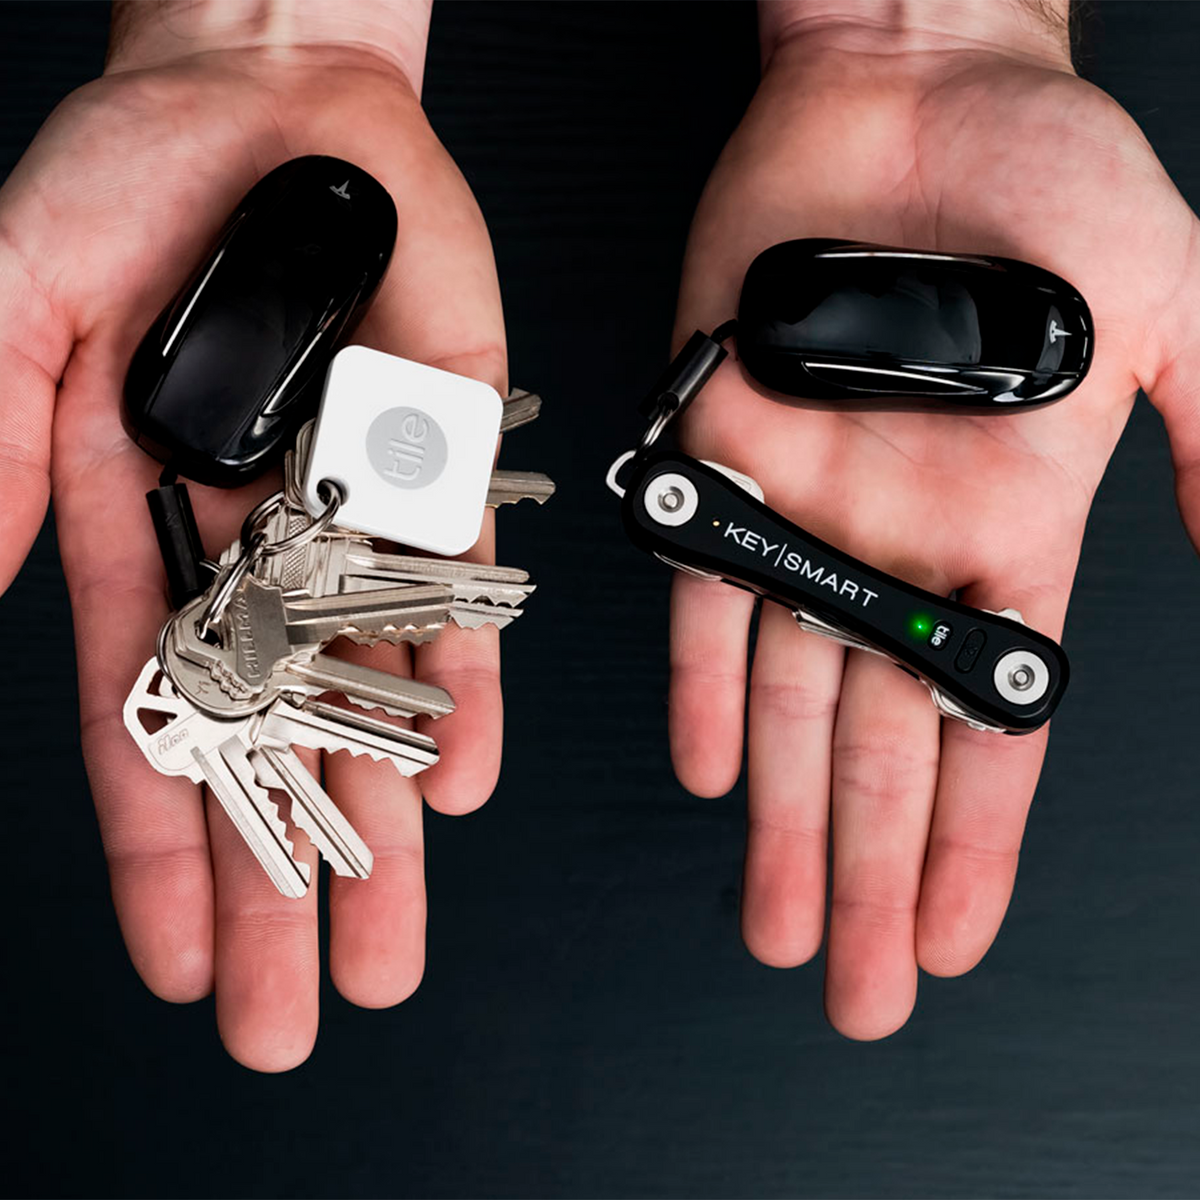 KeySmart® Pro w/ Tile | Works With Tile App for Android & iOS | Locate Lost Keys